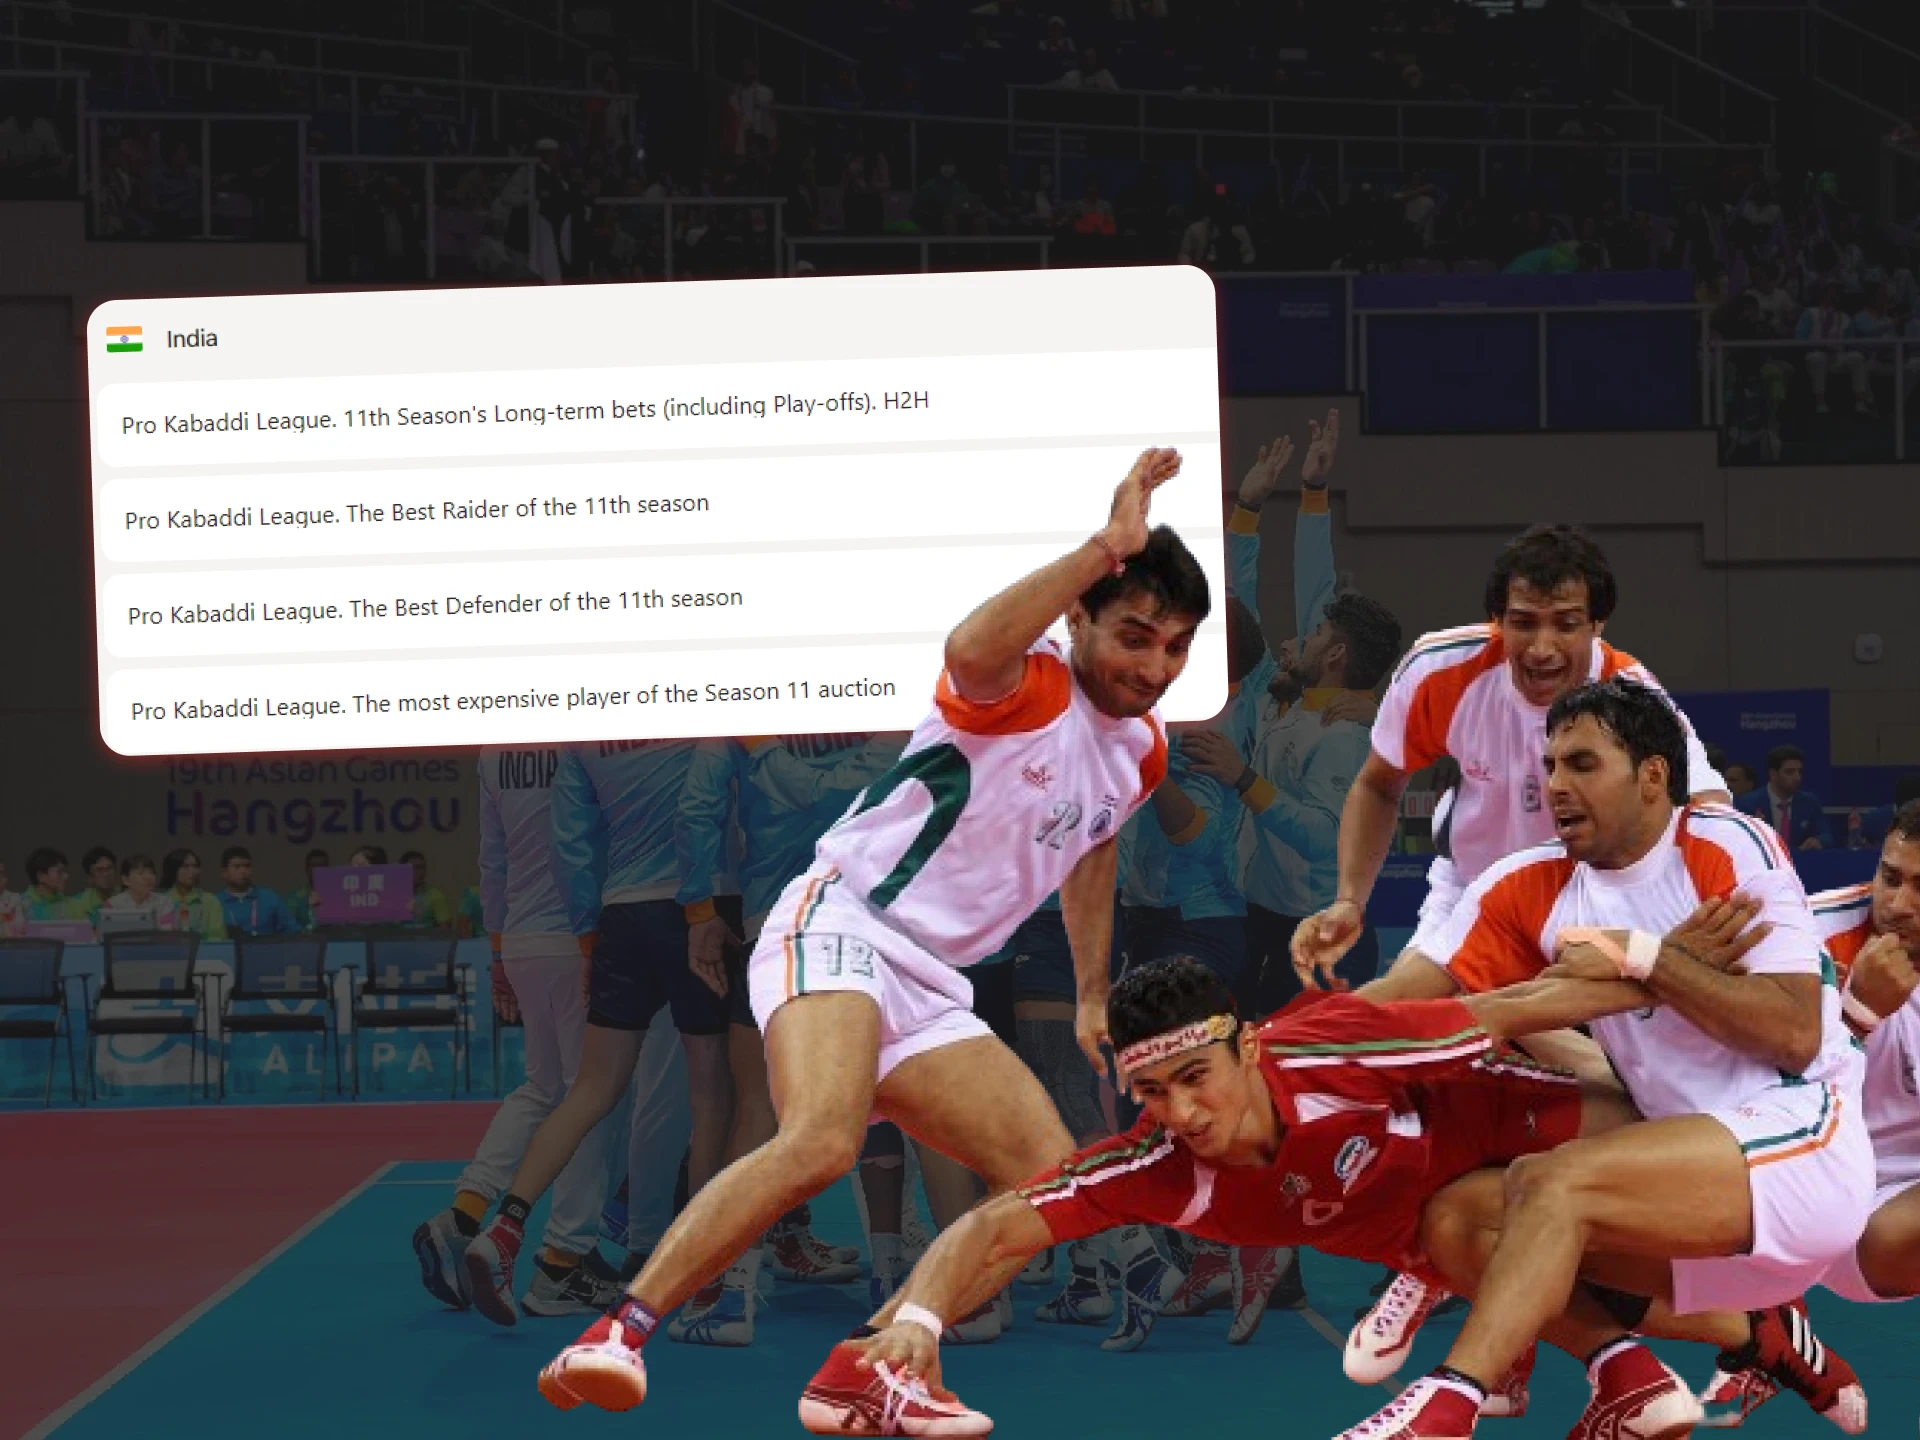 Placing bets on kabaddi online has become much easier; at top bookmakers you will find a kabaddi section and you can quickly place a bet on the event that interests you.